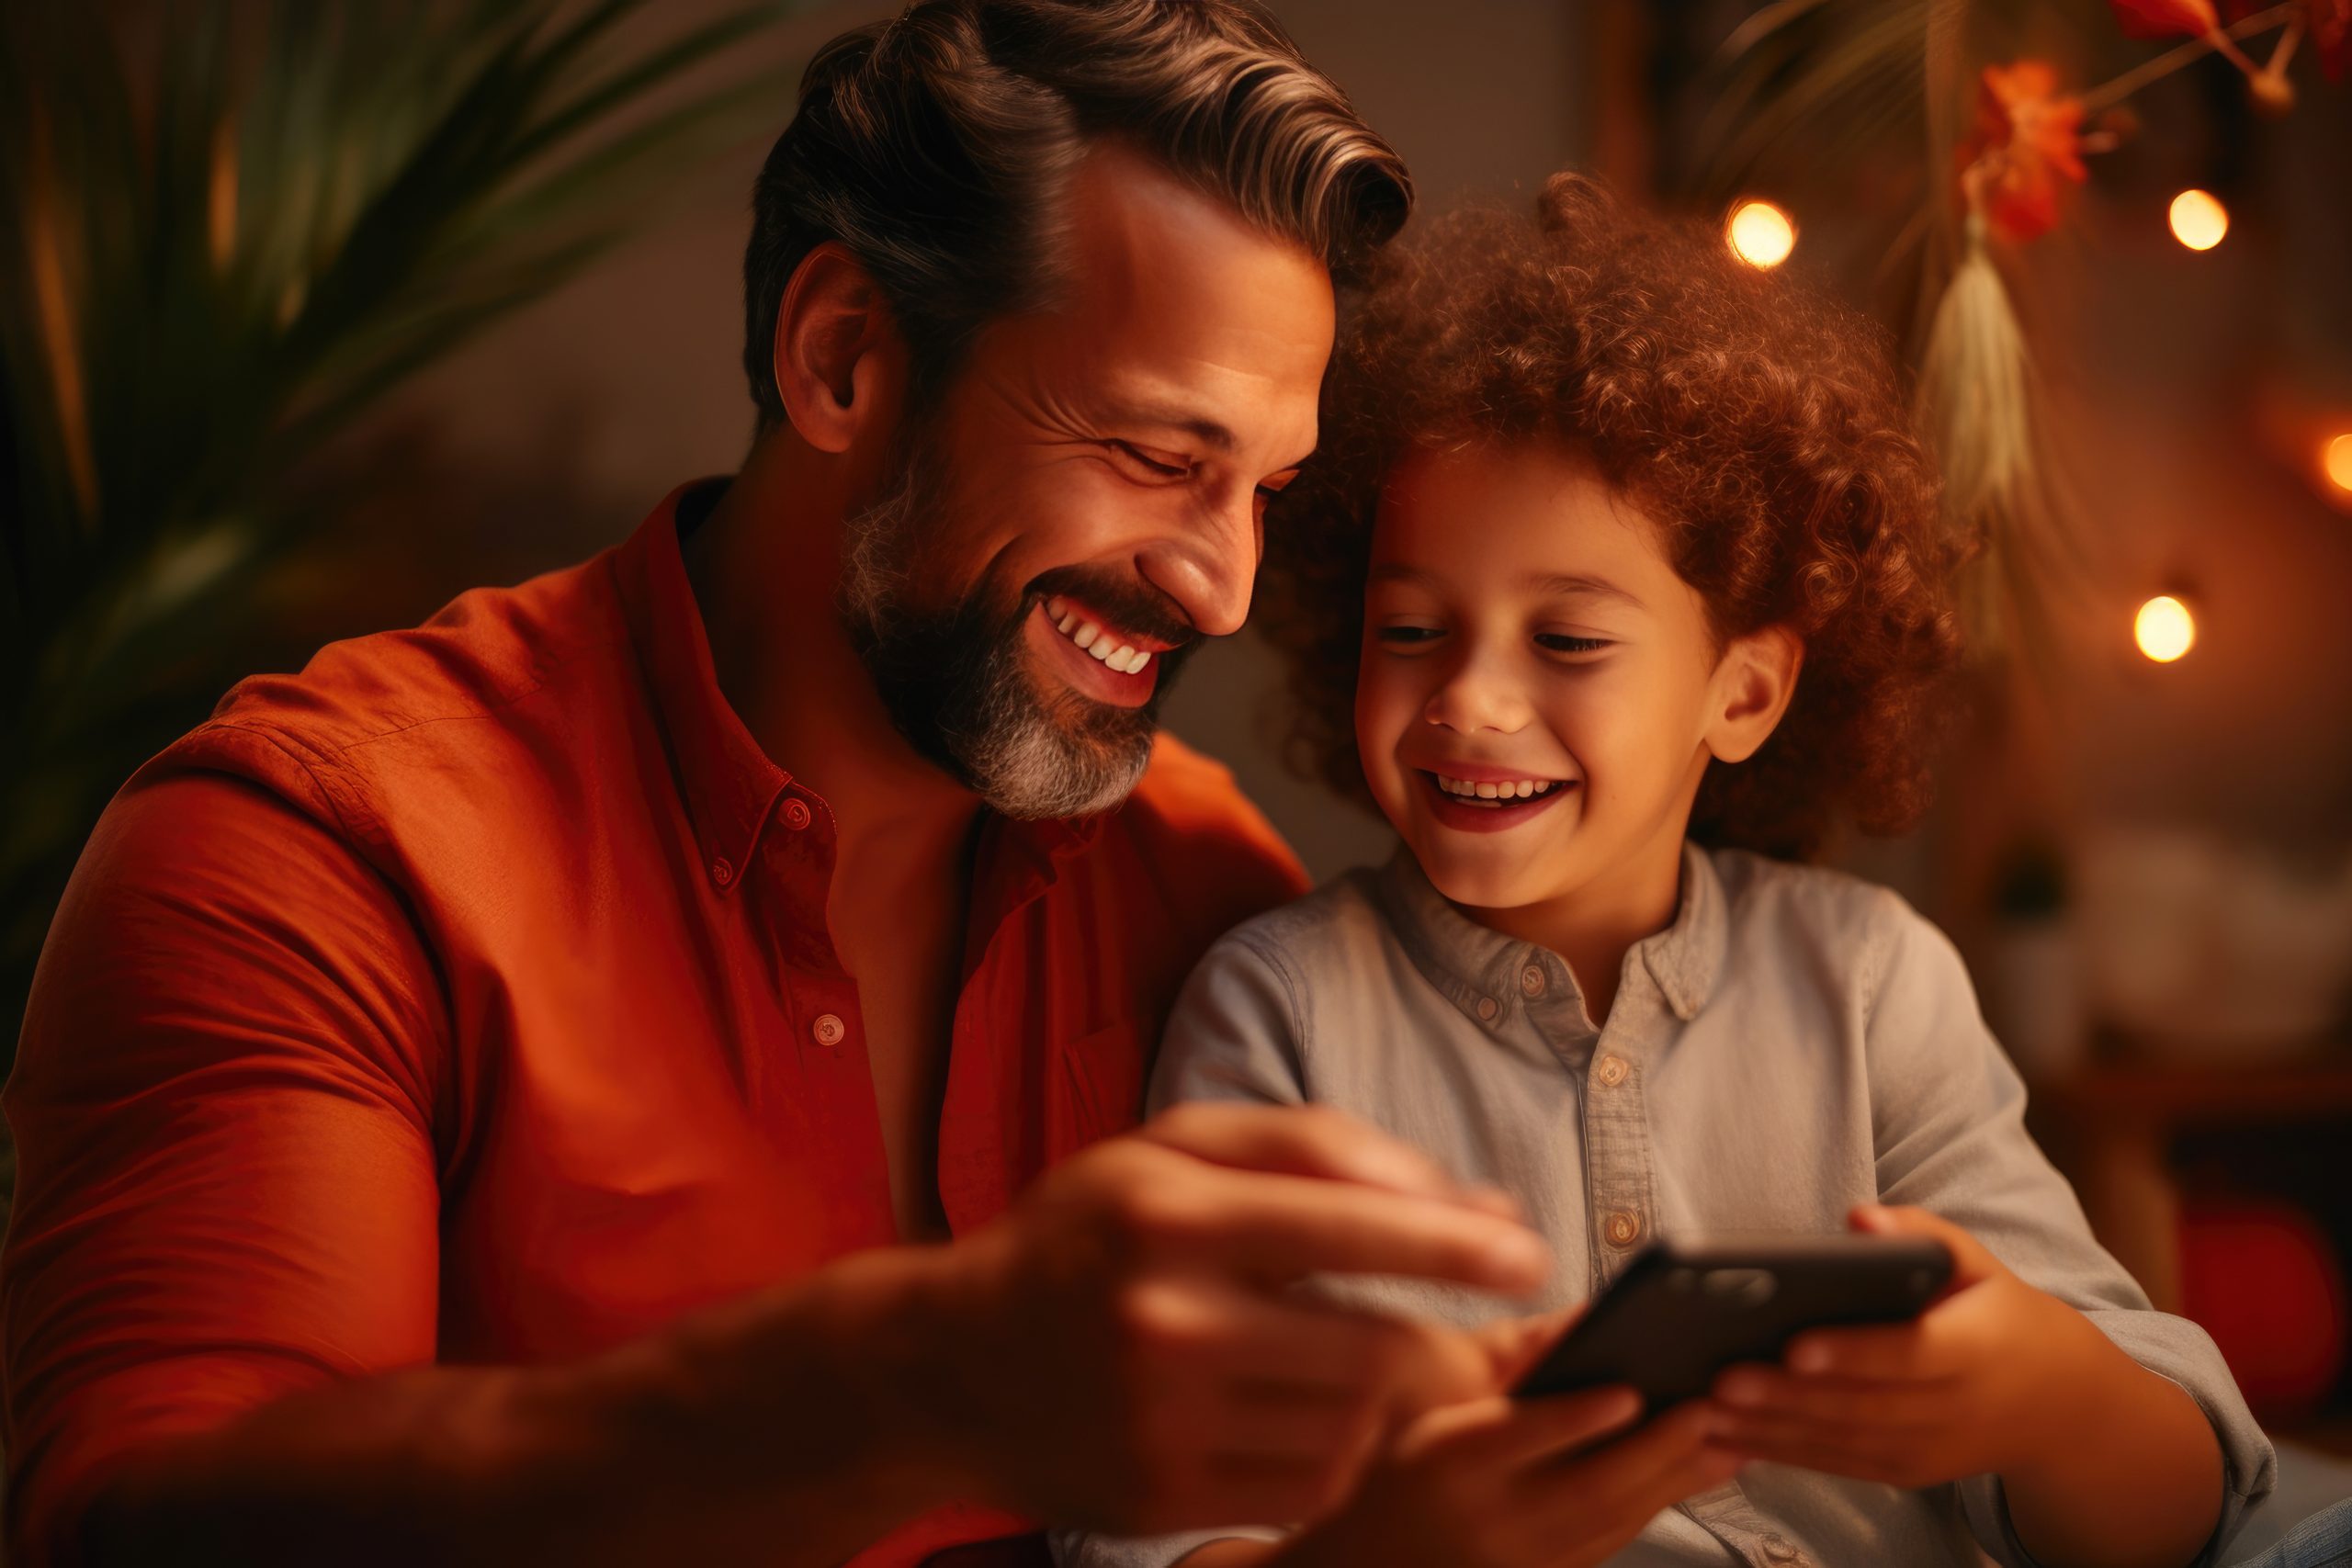 Capturing Memories with Dad on a Smartphone